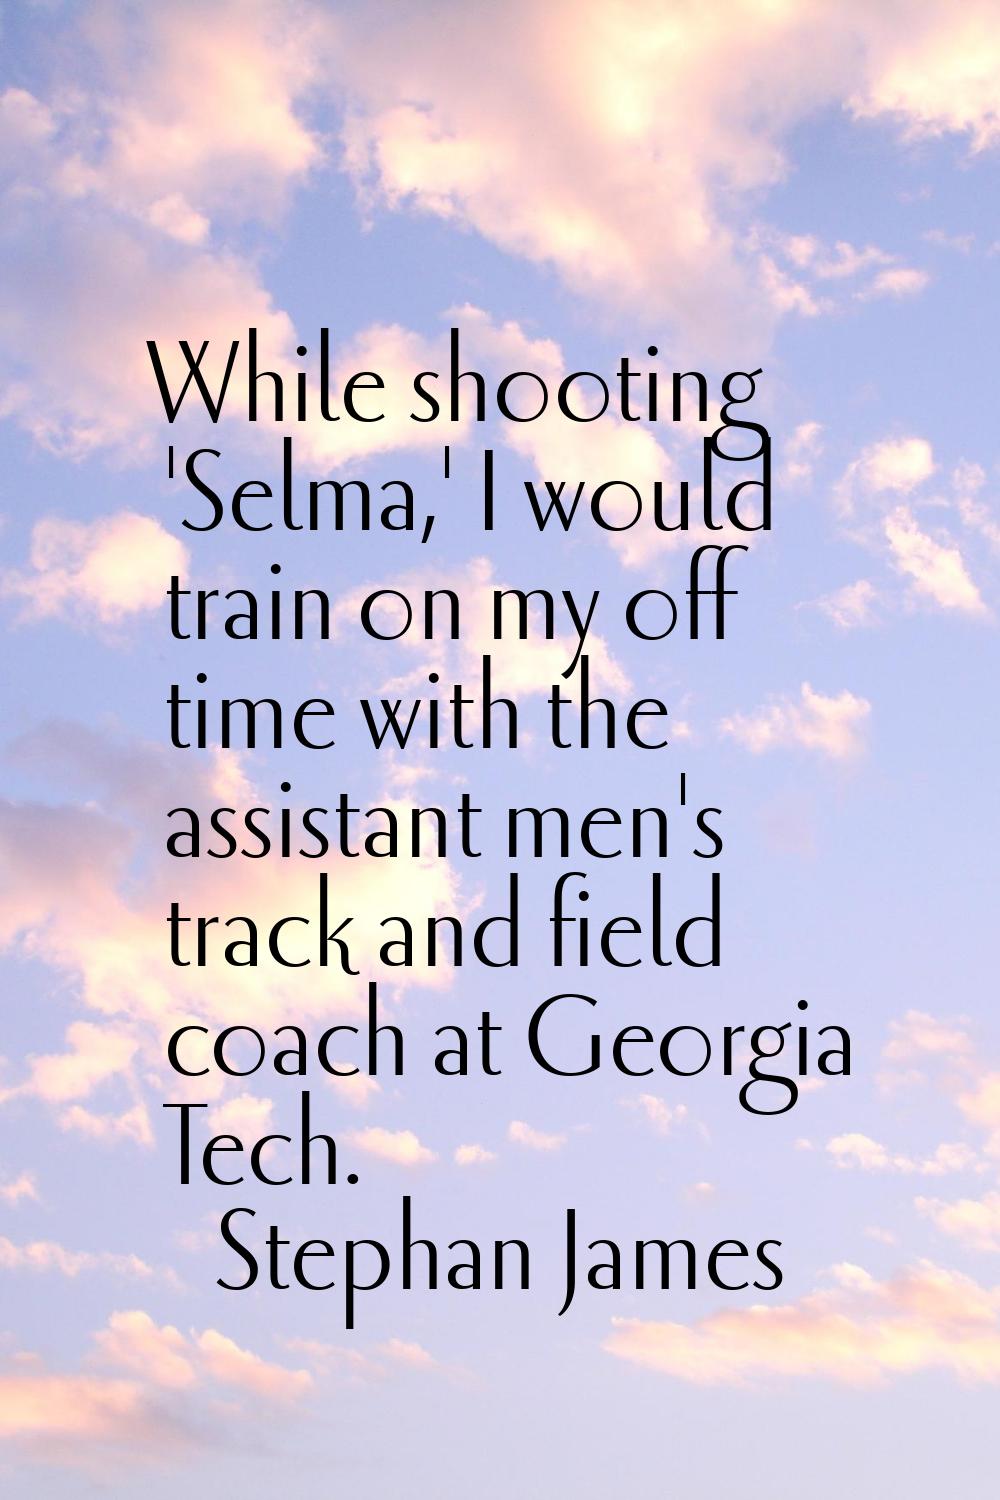 While shooting 'Selma,' I would train on my off time with the assistant men's track and field coach